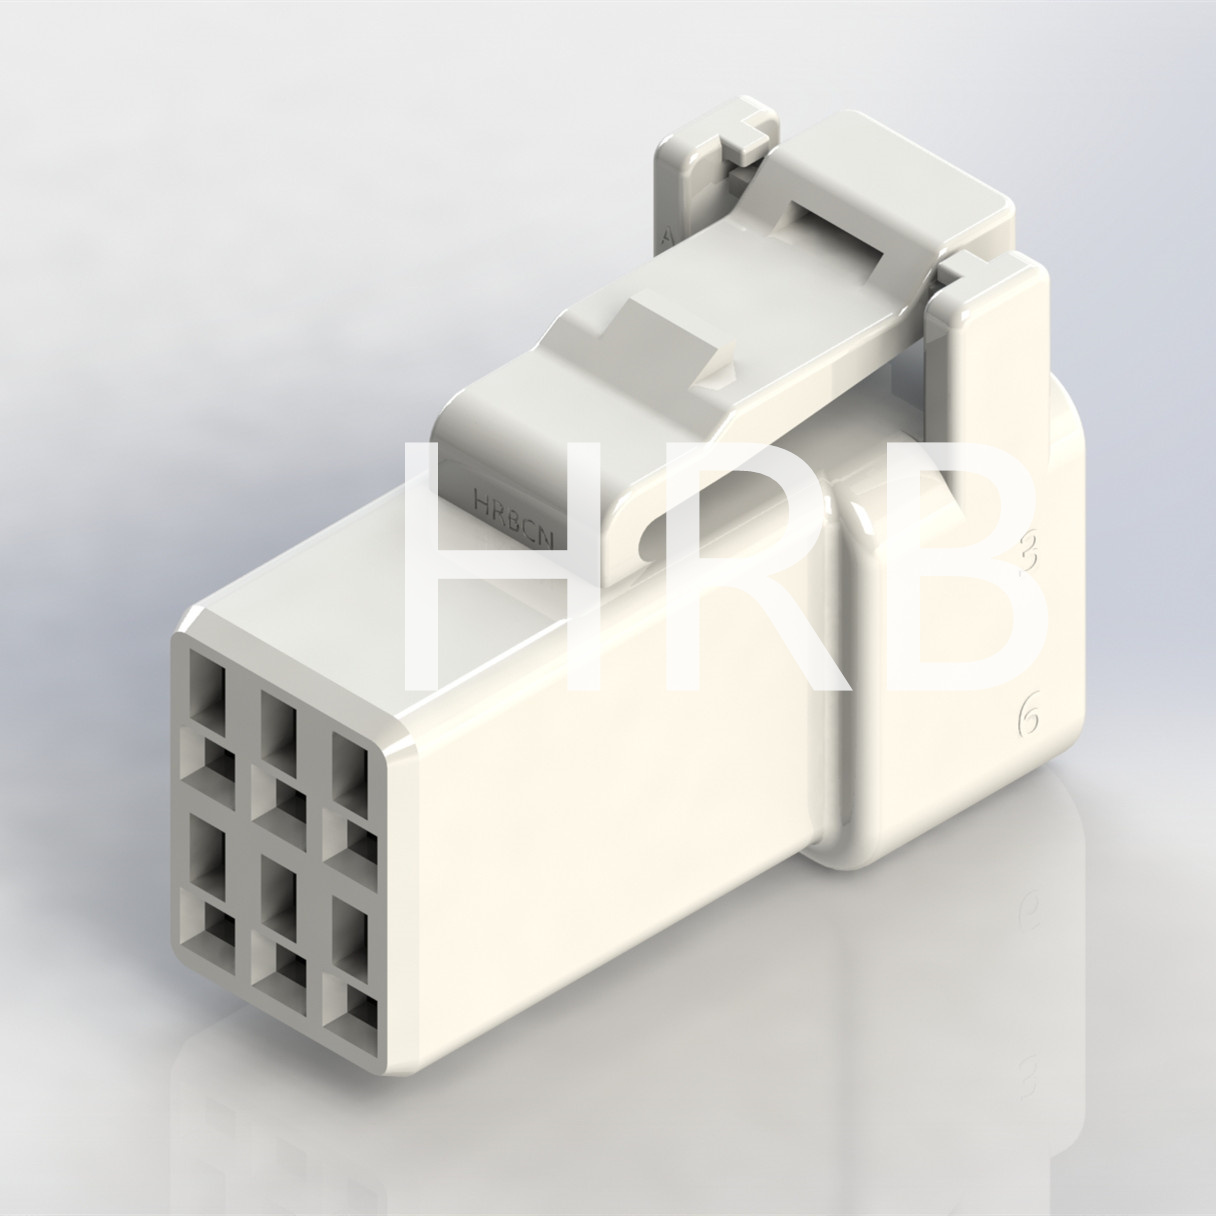 6 poles 2.0 pitch water-proof connector of HRB